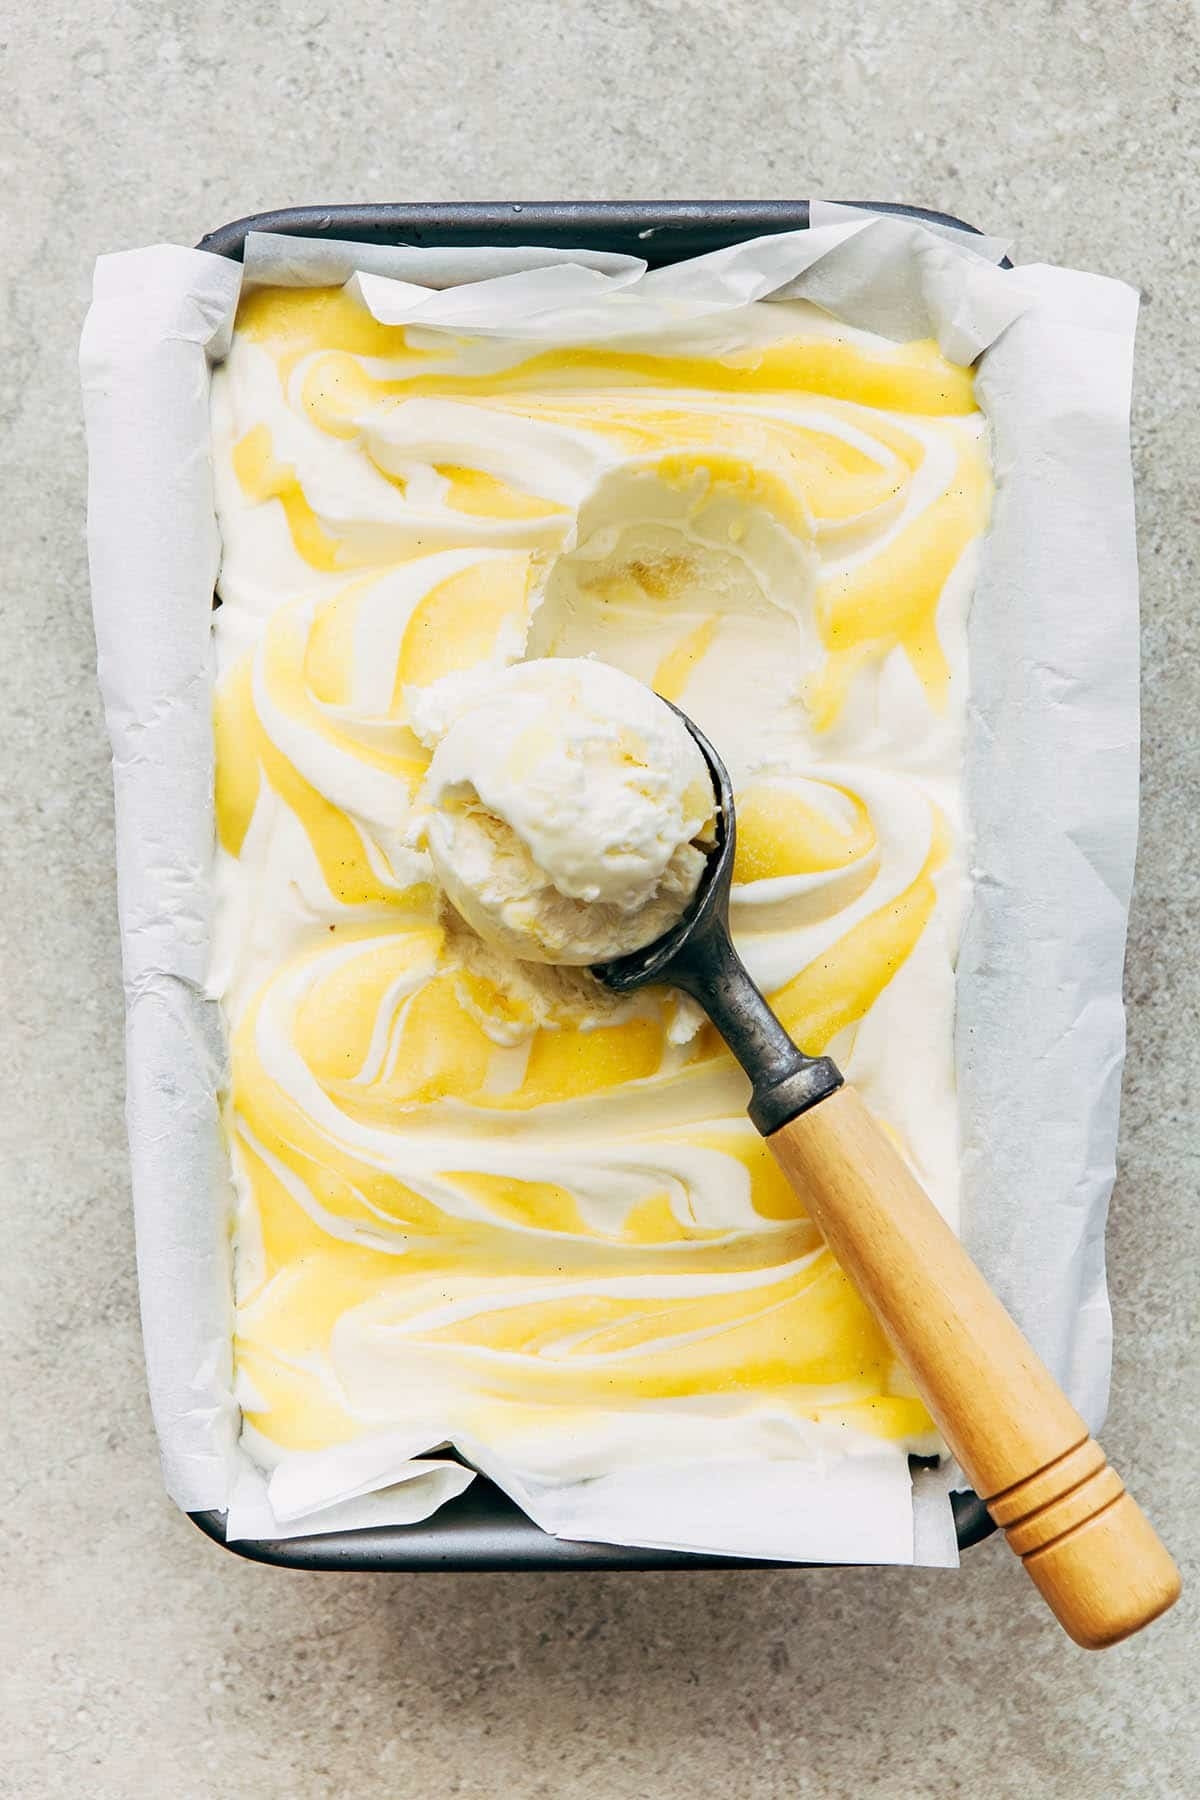 Ice cream swirled with lemon curd being scooped.